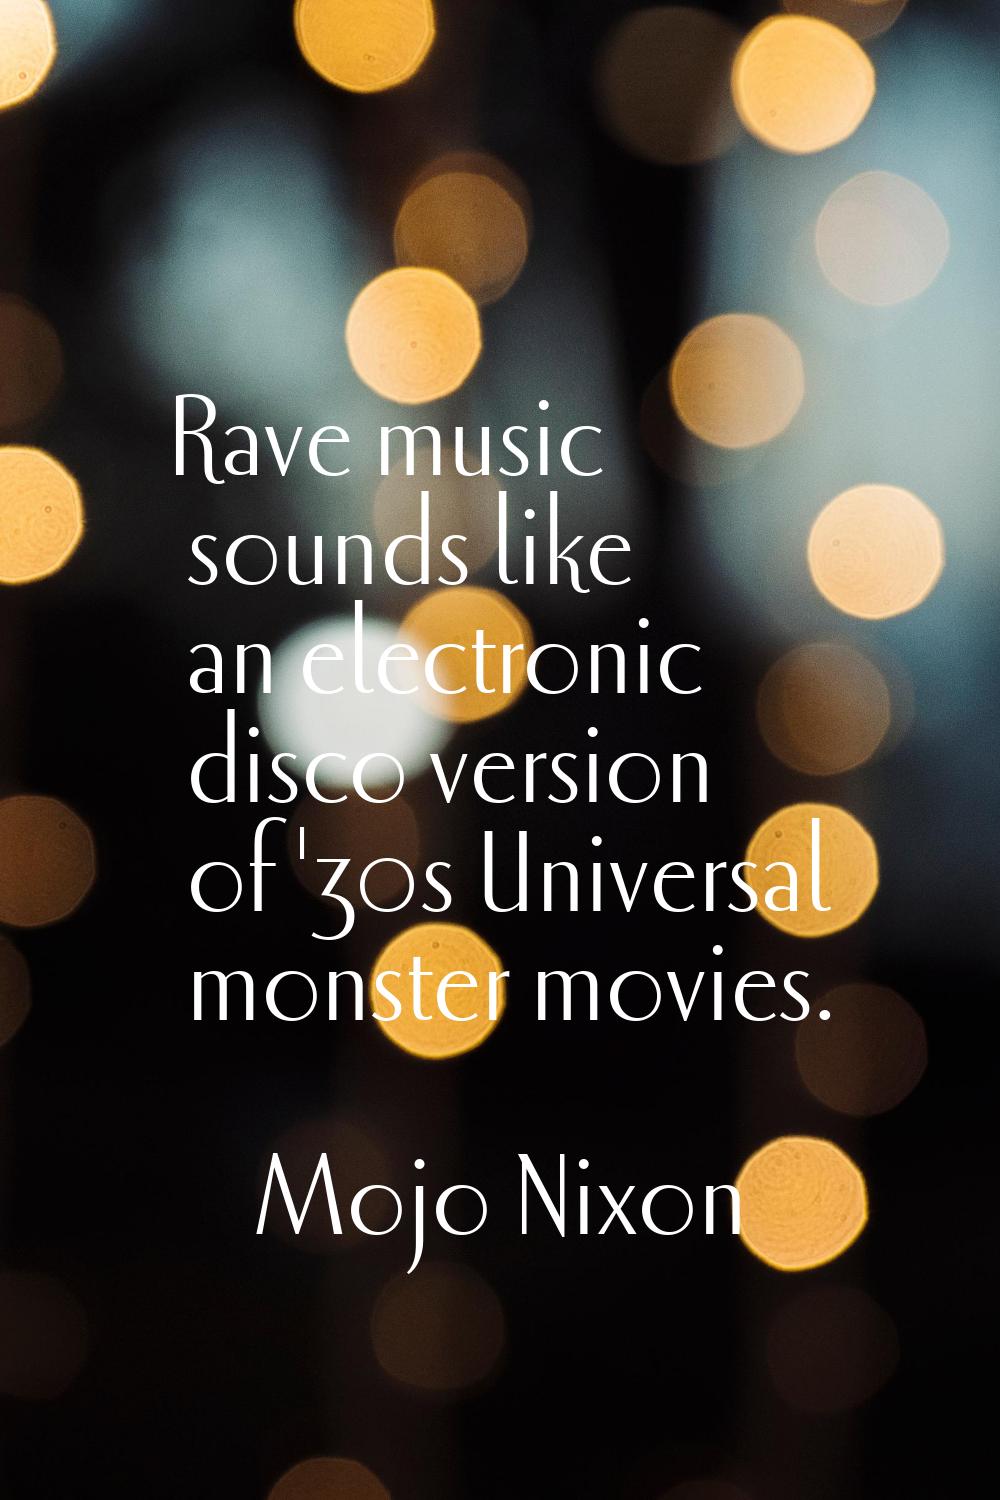 Rave music sounds like an electronic disco version of '30s Universal monster movies.